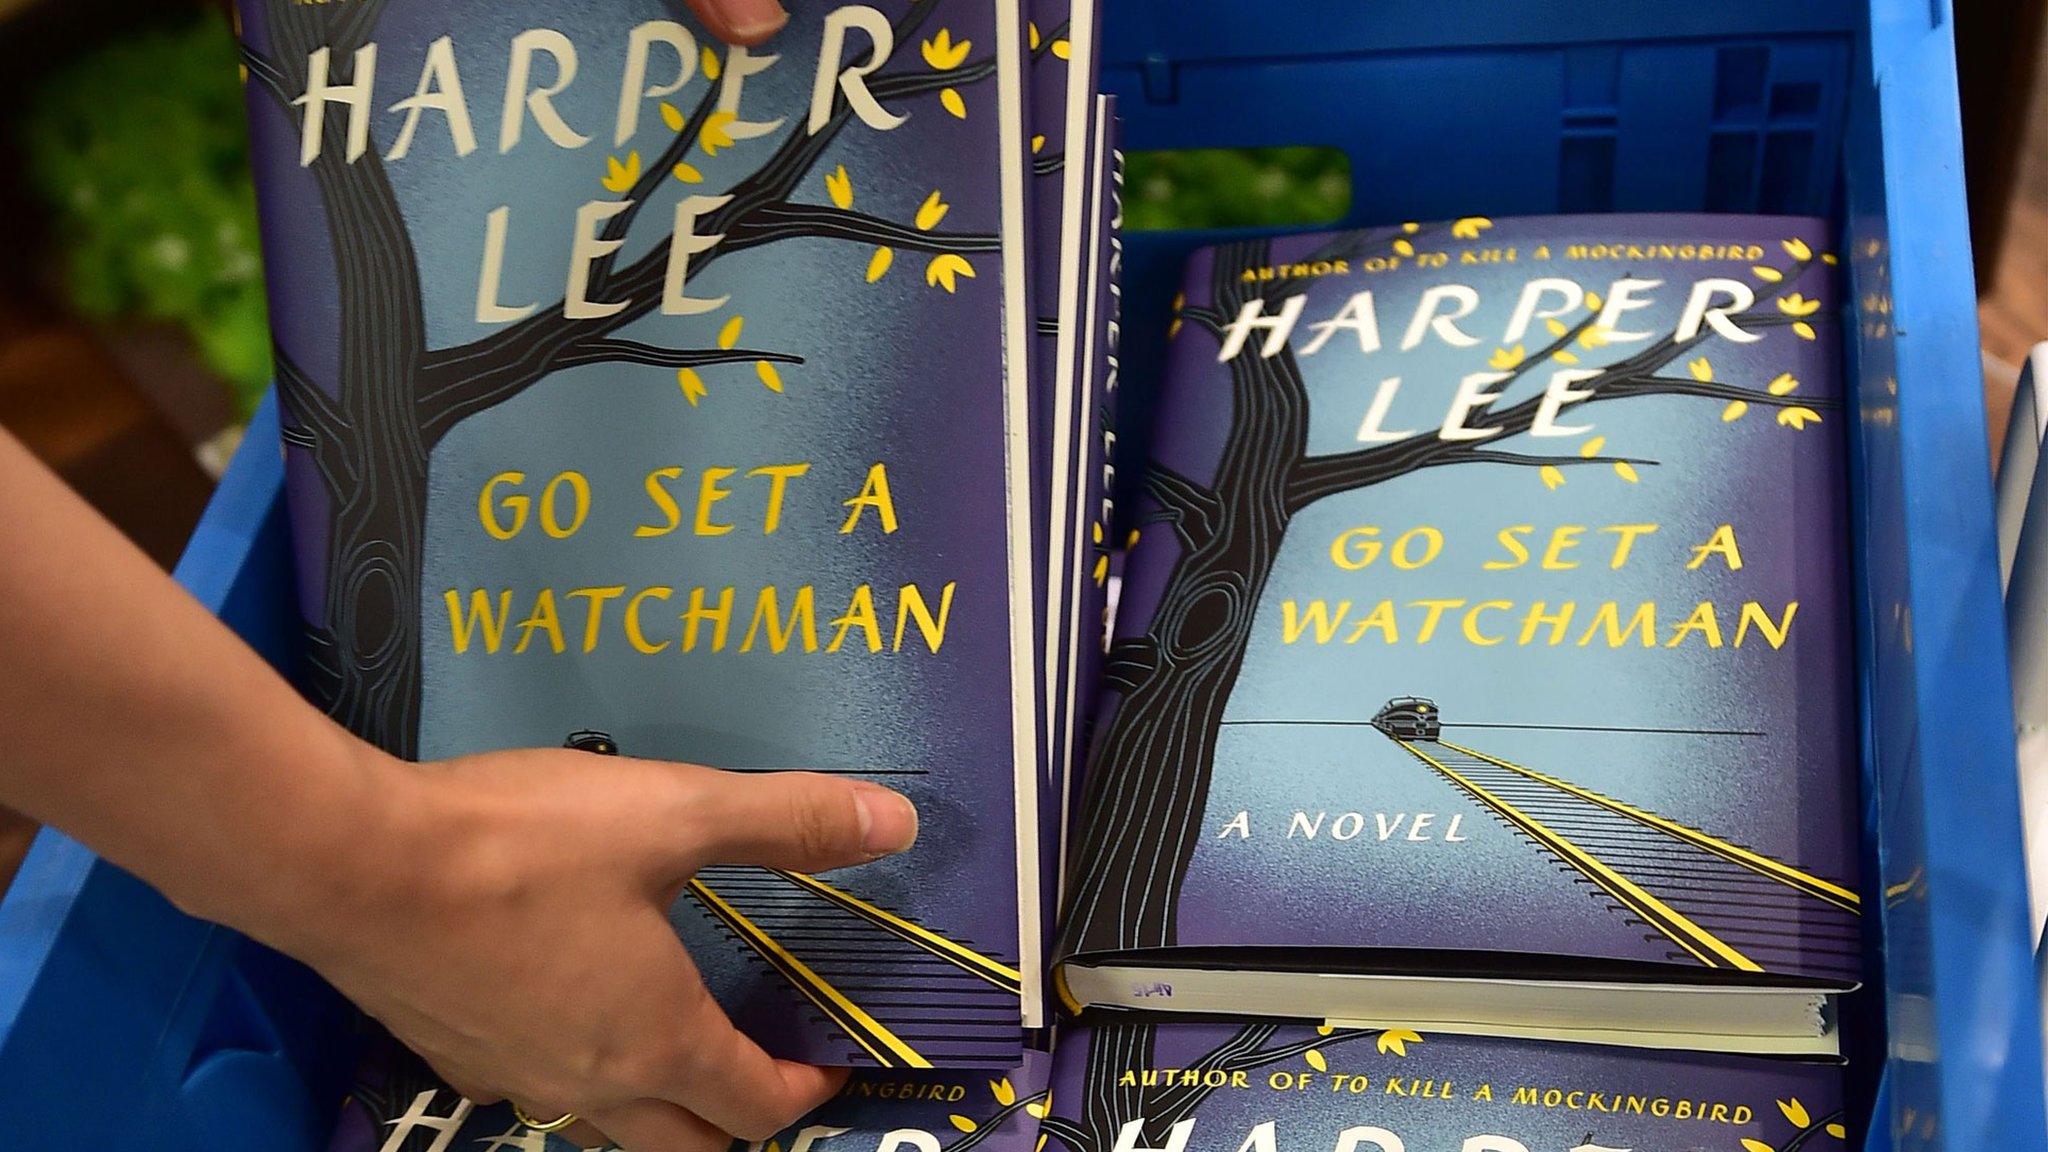 Harper Lee's Go Set a Watchman goes on sale - BBC News